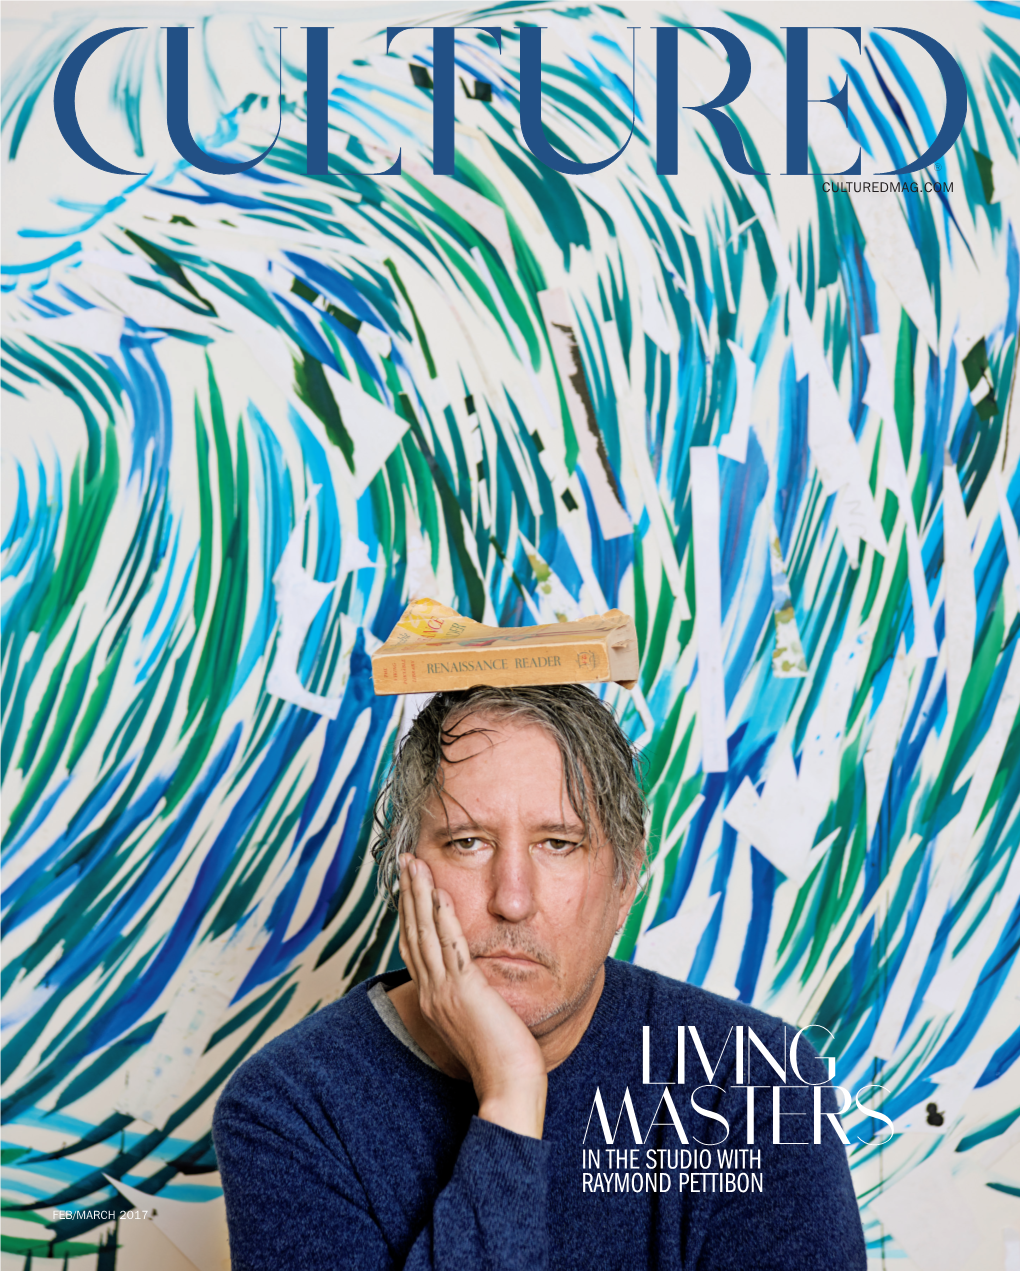 LIVING MASTERS in the STUDIO with RAYMOND PETTIBON FEB/MARCH 2017 by the SEA with a Half Century of Captivating Waterfront